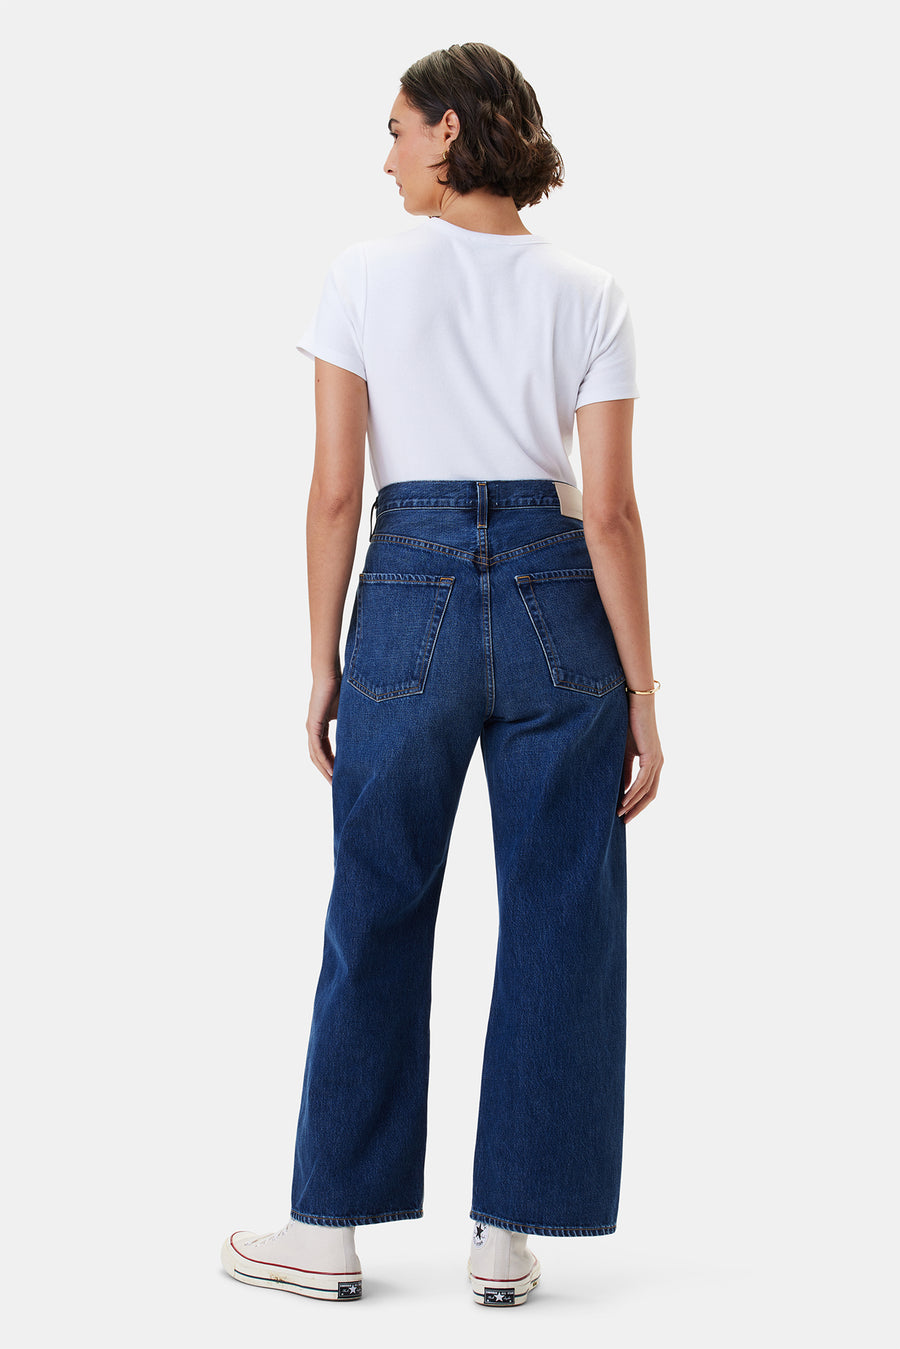 Citizens of Humanity Gaucho Vintage Wide Leg Jean - Notions